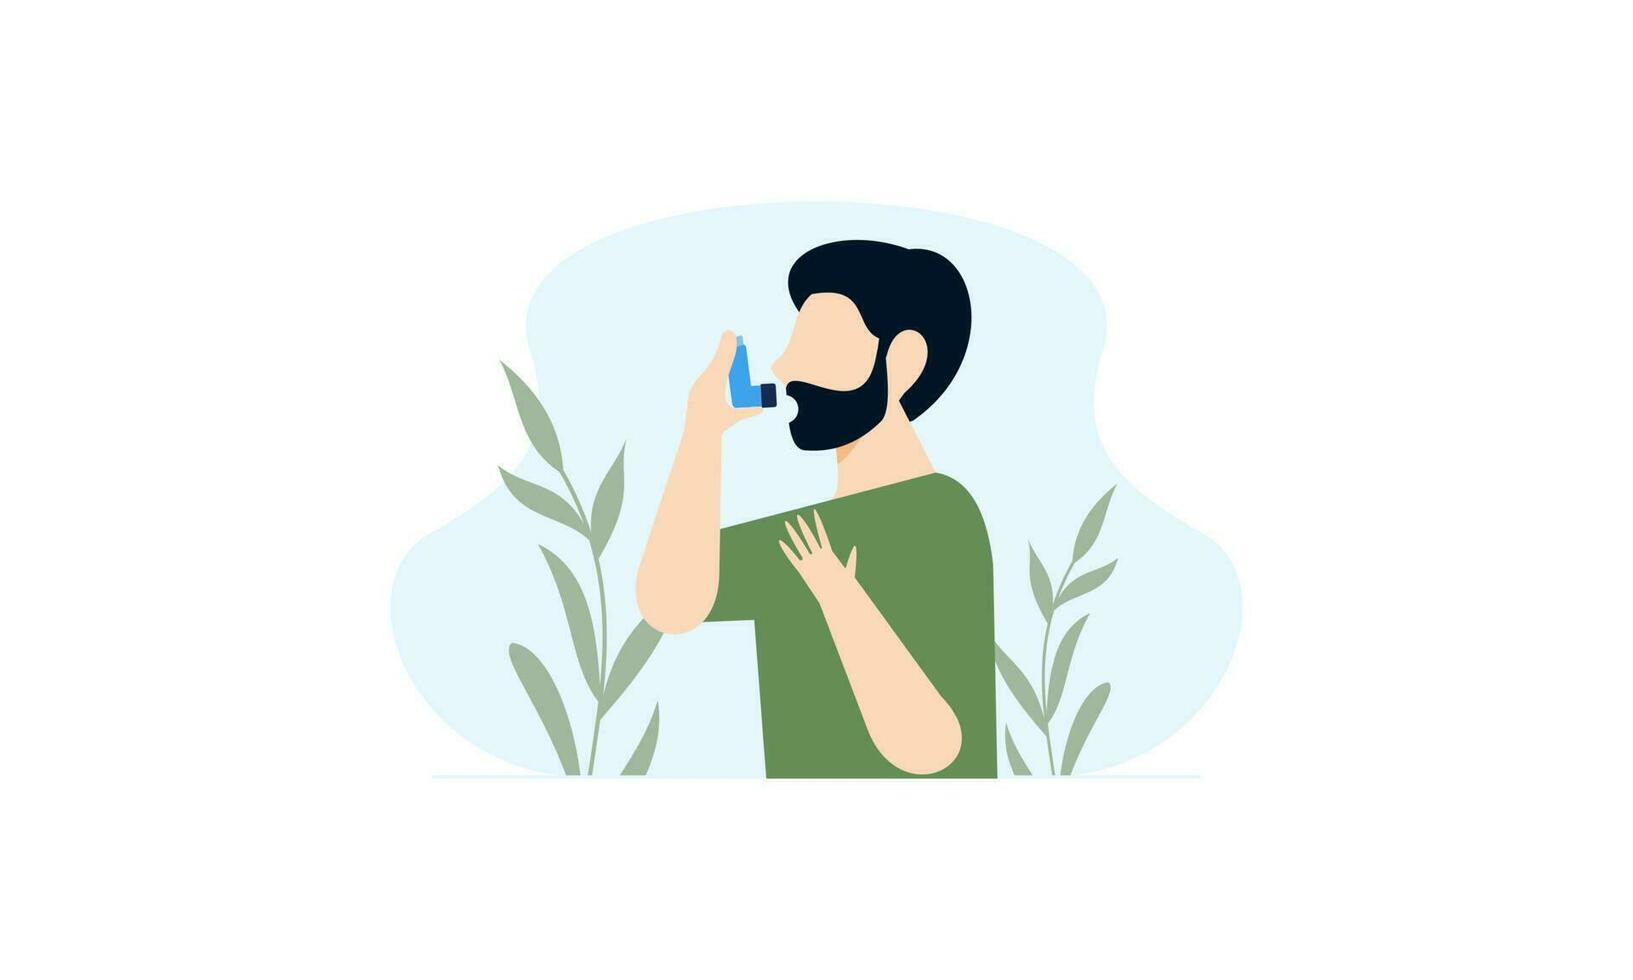 People uses an asthma inhaler against an allergic attack. World asthma day vector